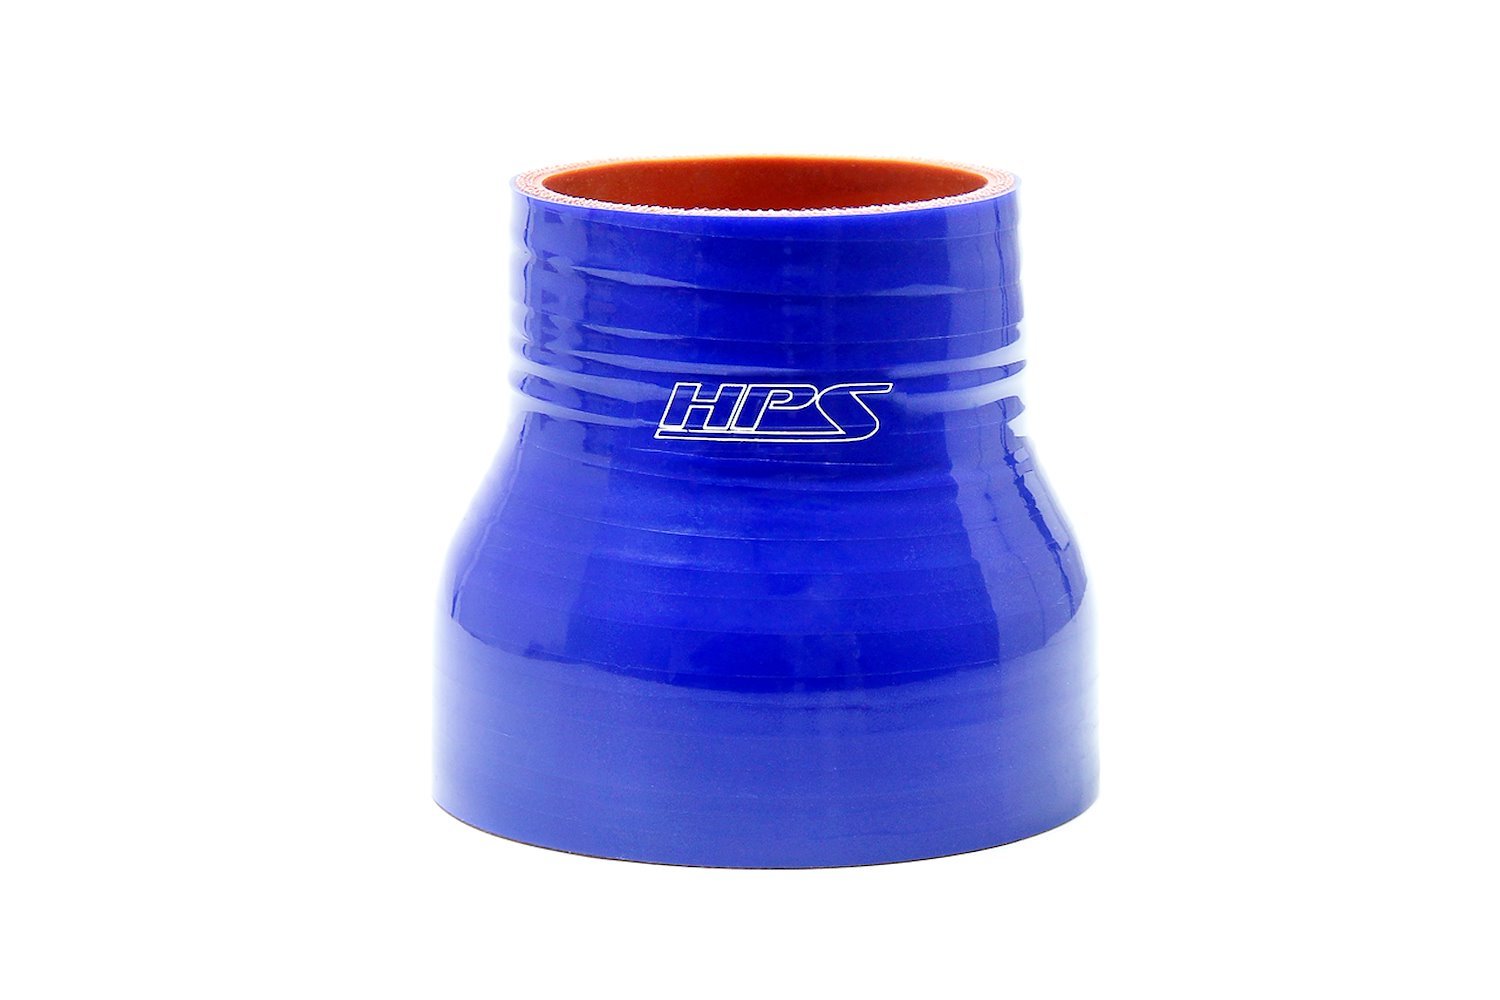 HTSR-162-200-BLUE Silicone Reducer Hose, High-Temp 4-Ply Reinforced, 1-5/8 in. - 2 in. ID, 3 in. Long, Blue